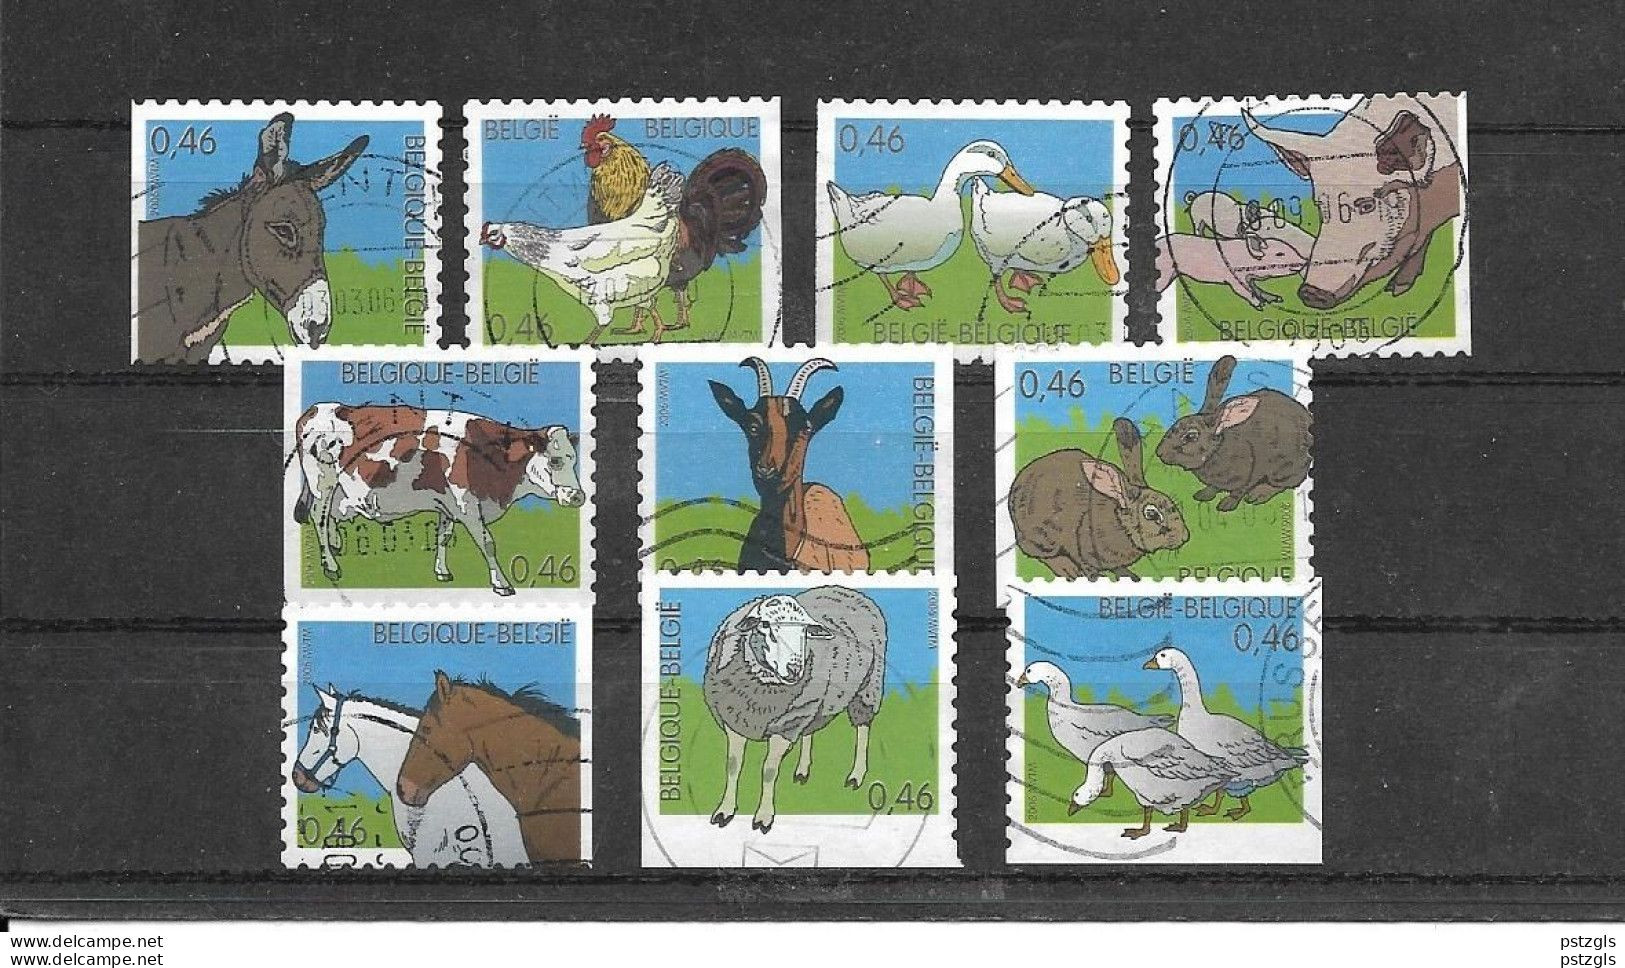 3481/90° - 2006 - Used Stamps